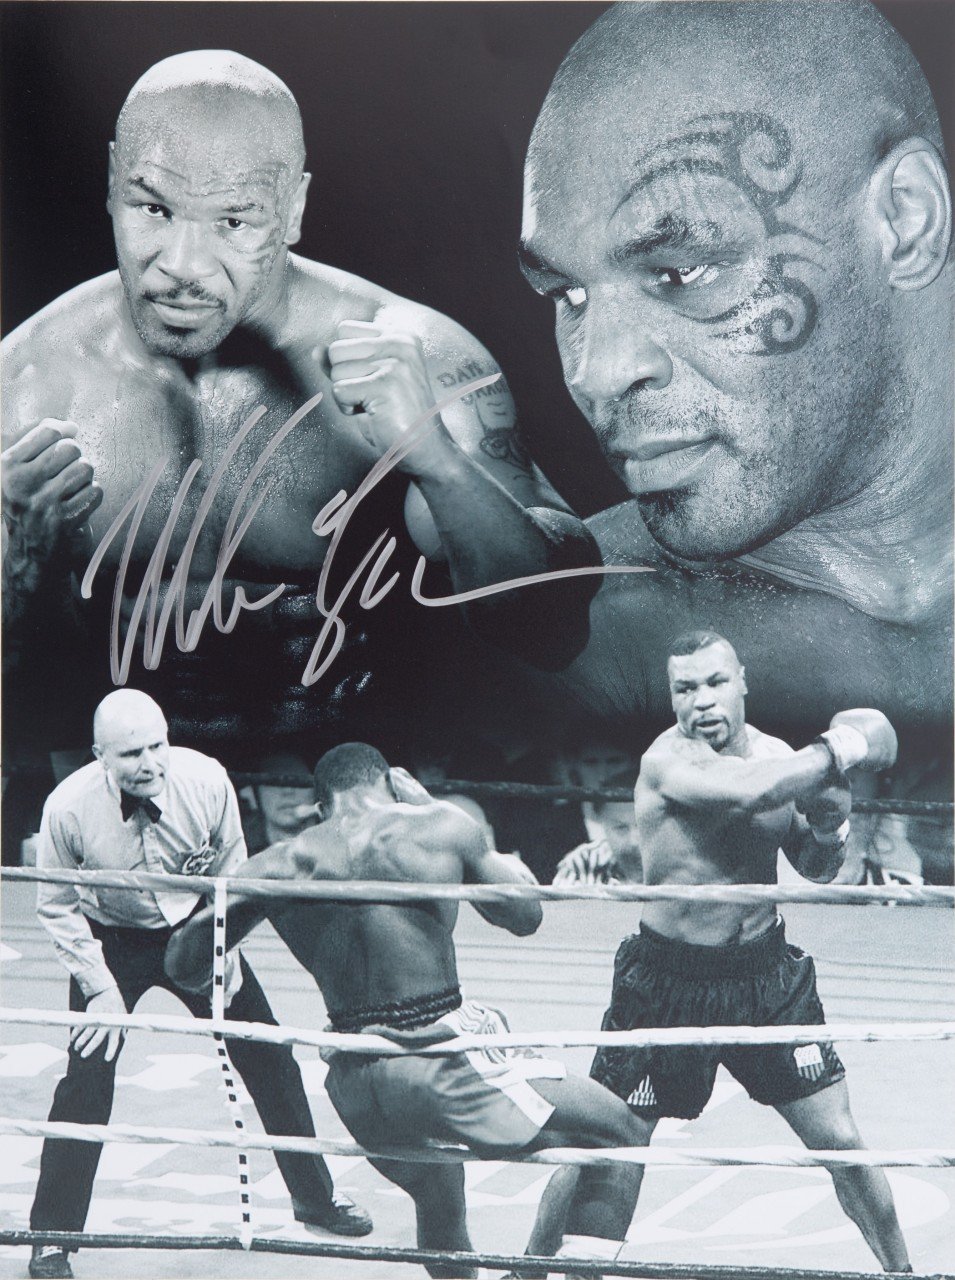 MIKE TYSON Autographed signed 8x10 Photo Picture REPRINT.